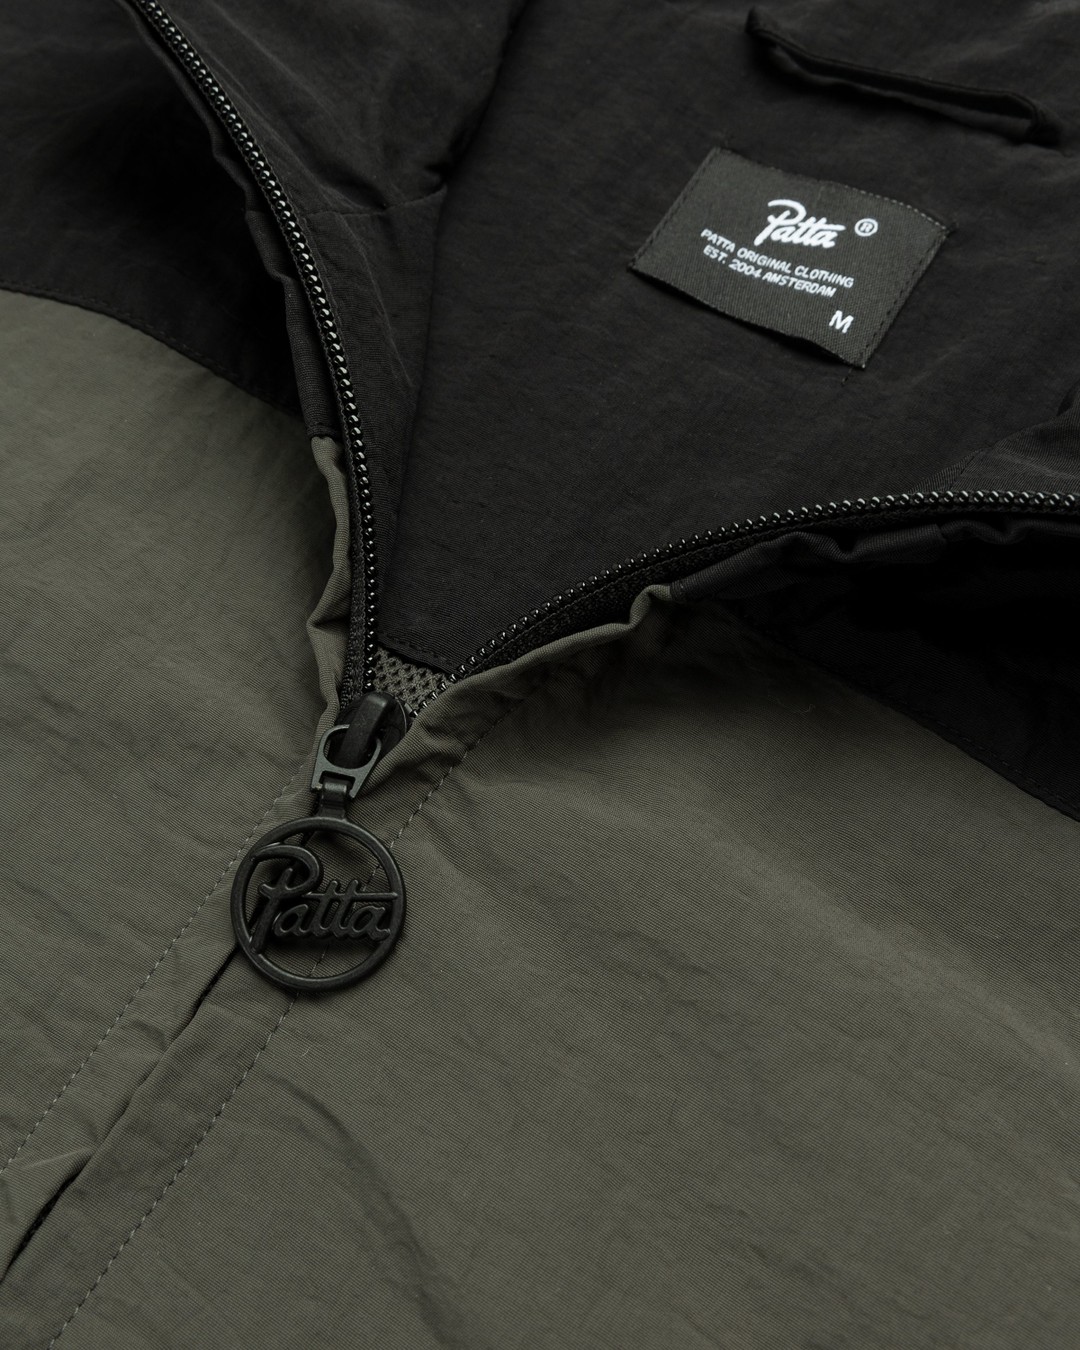 Patta – Athletic Track Jacket Black/Charcoal Grey - Outerwear - Black - Image 6